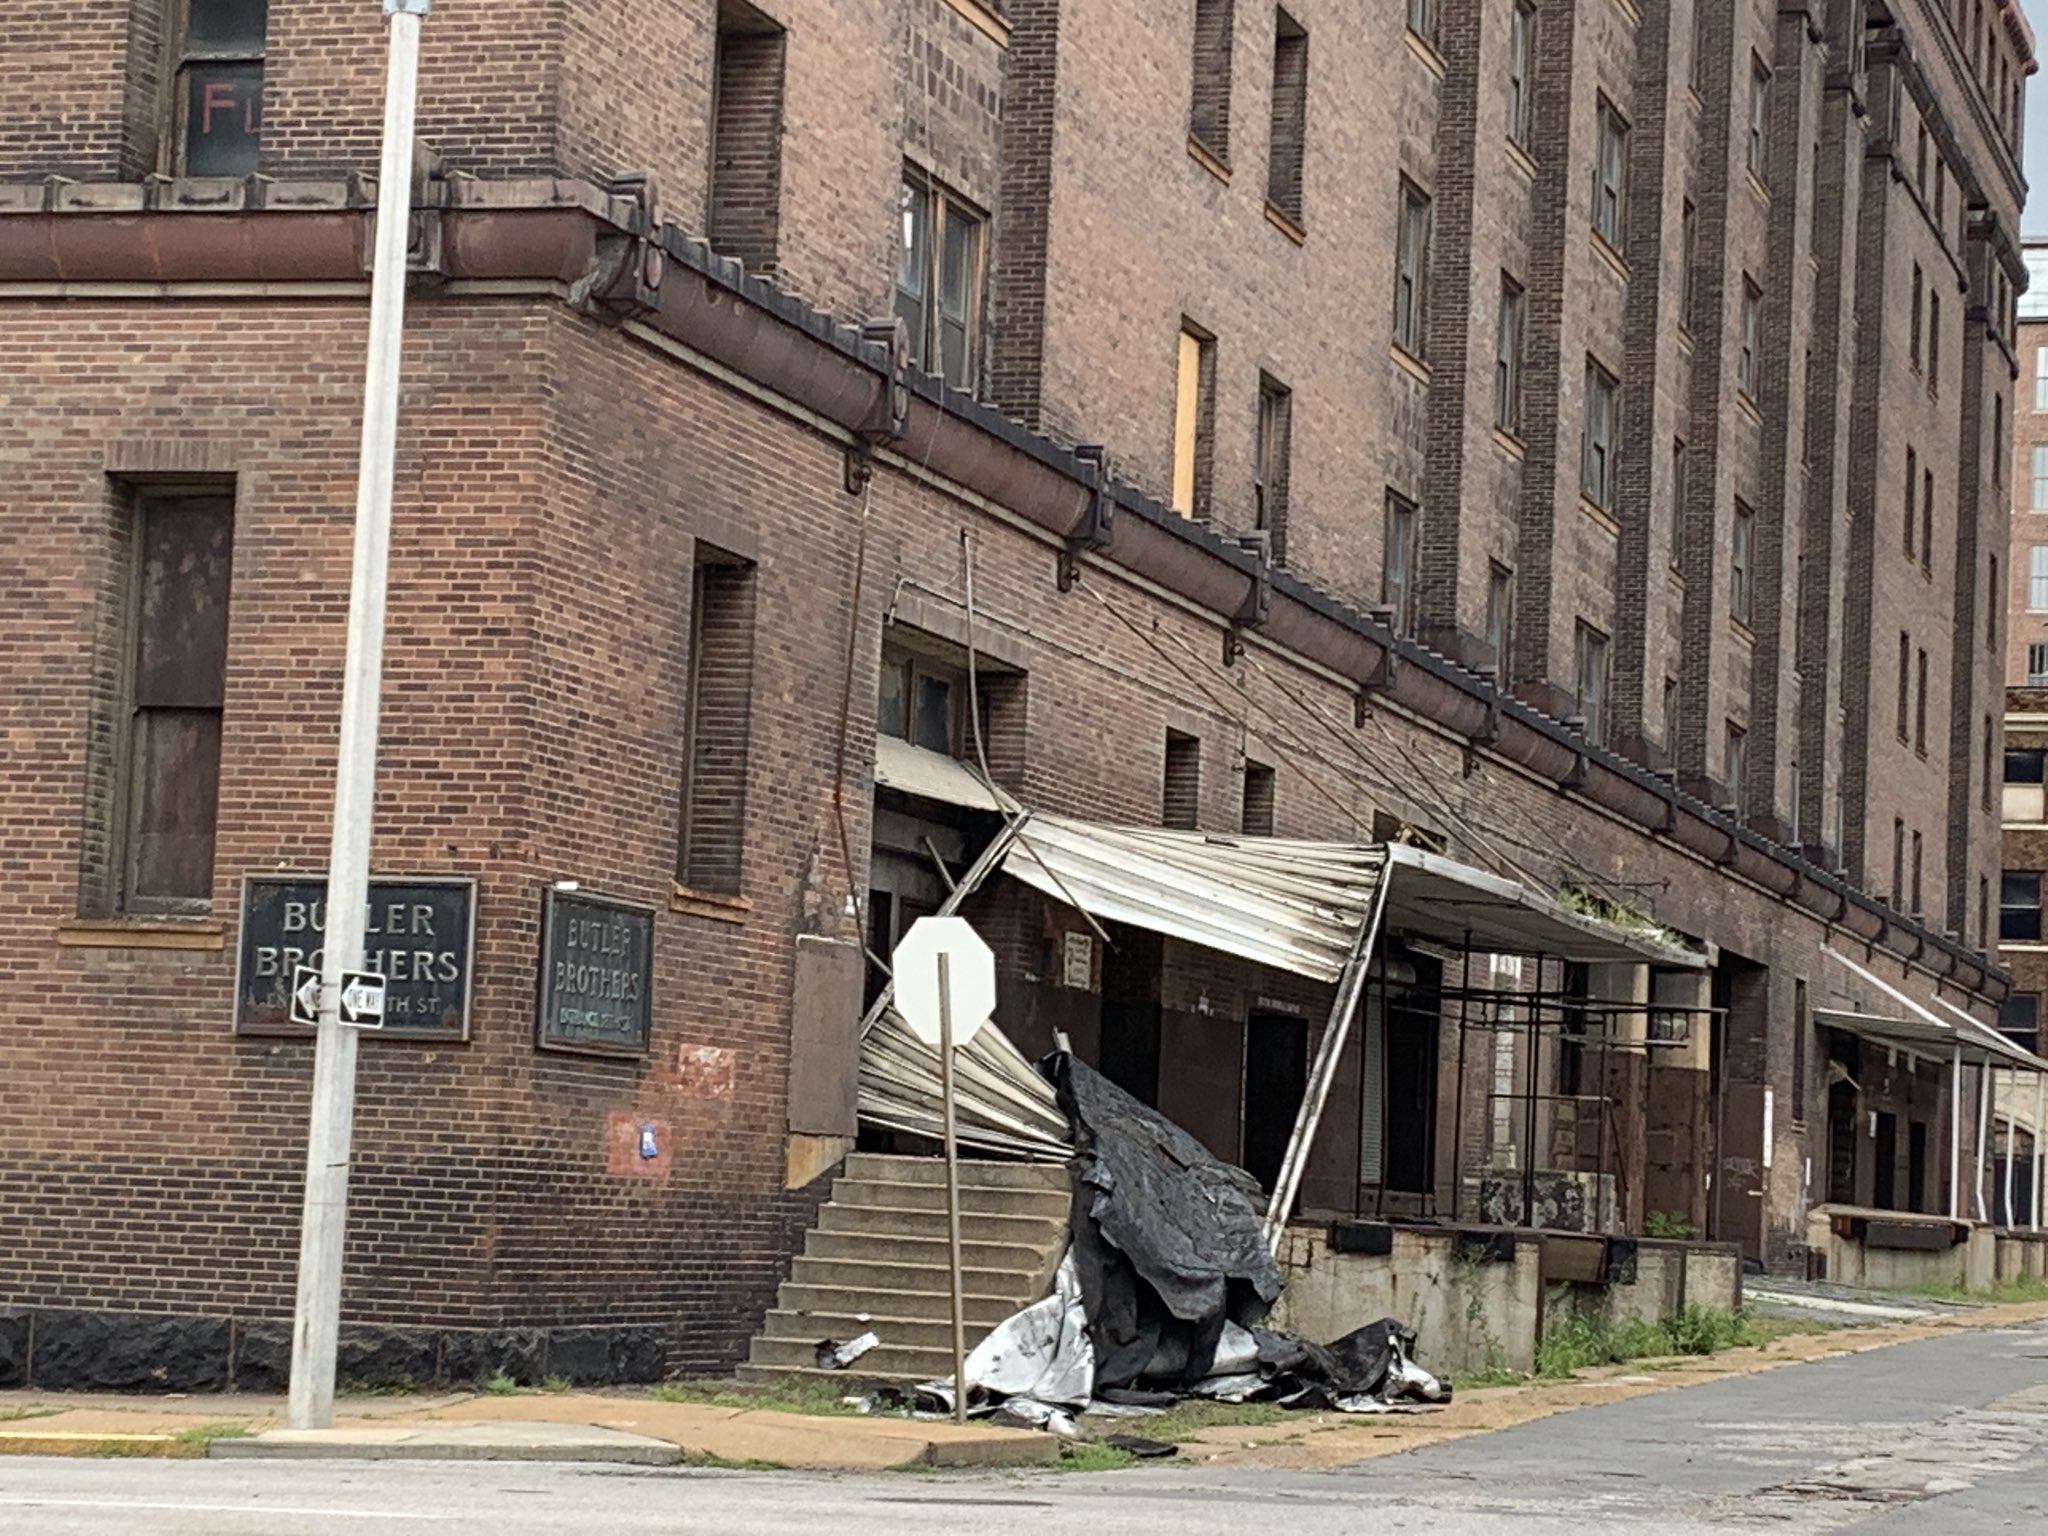 Photo of wind damage in downtown St. Louis.